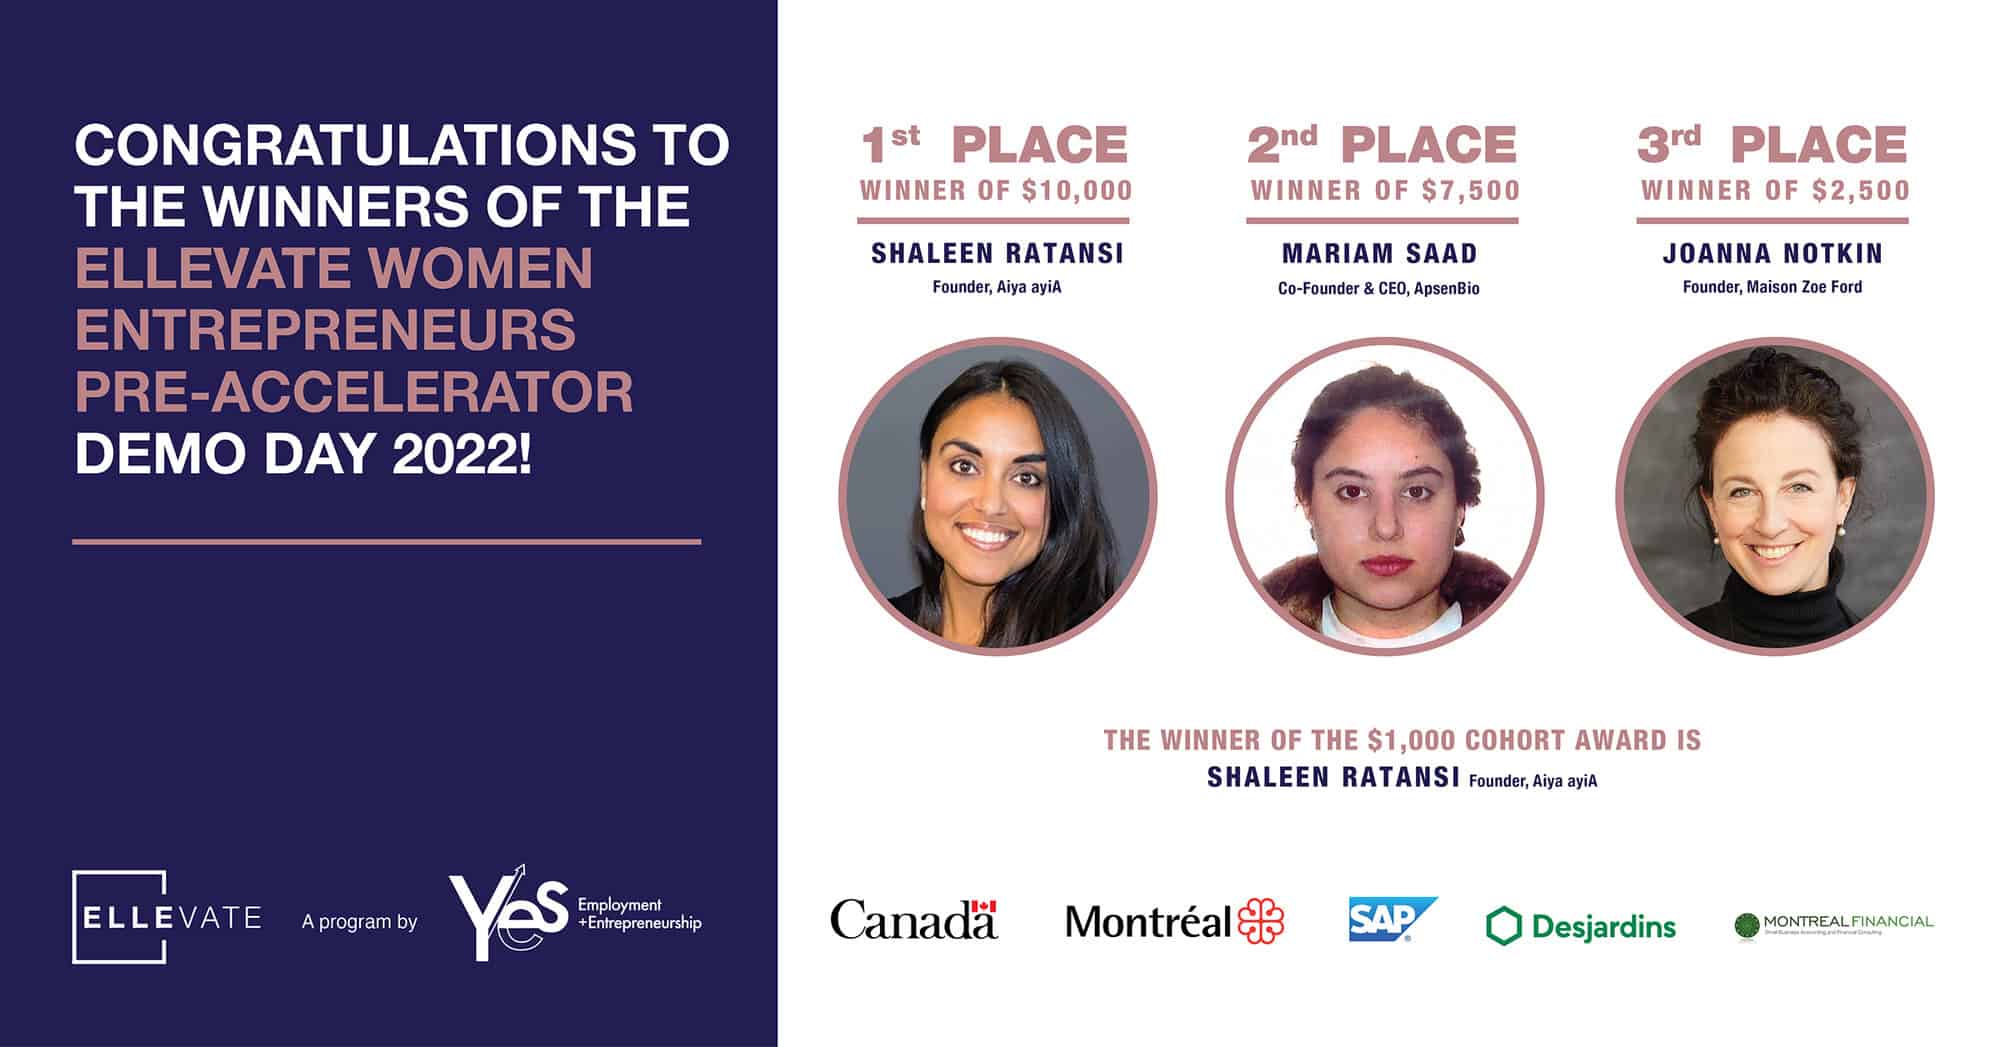 Ellevate Women Entrepreneurs Pre-Accelerator Demo Day 2022 Winners: Shaleen Ratansi (1st place), Mariam Saad (2nd Place), Joanna Notkin (3rd Place).